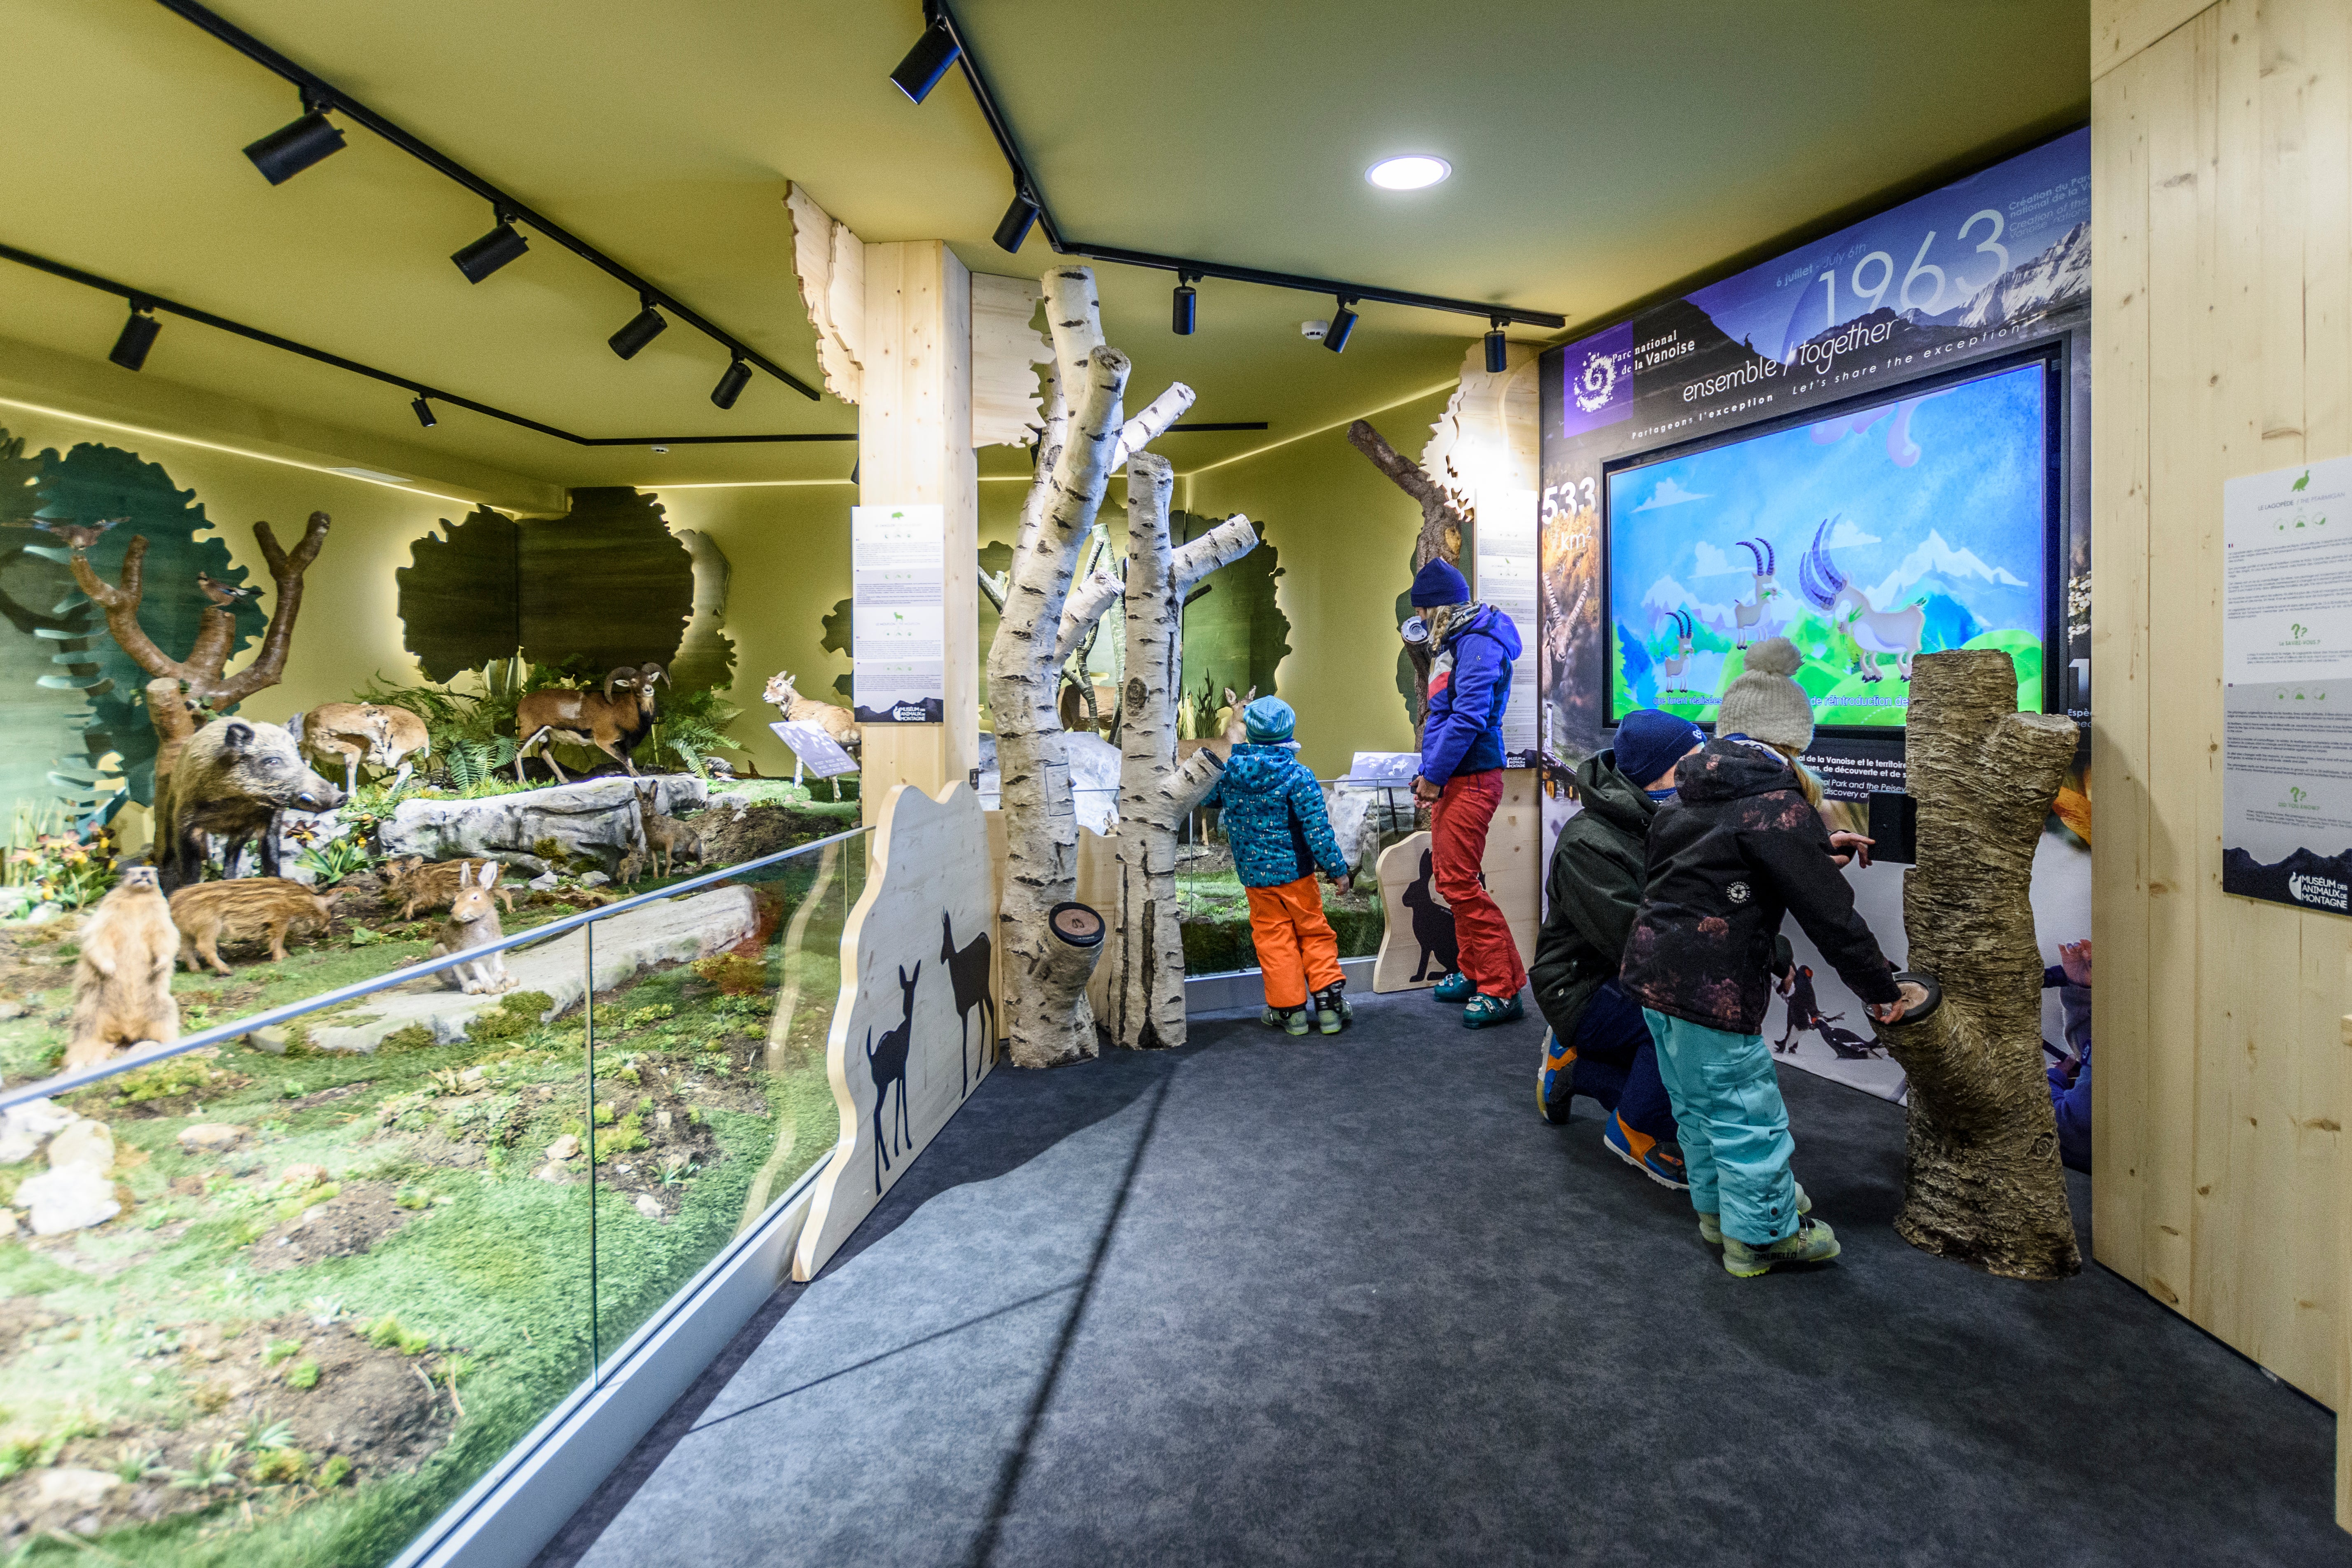 Les Arcs’ new Museum of Mountain Animals offers displays of Alpine critters